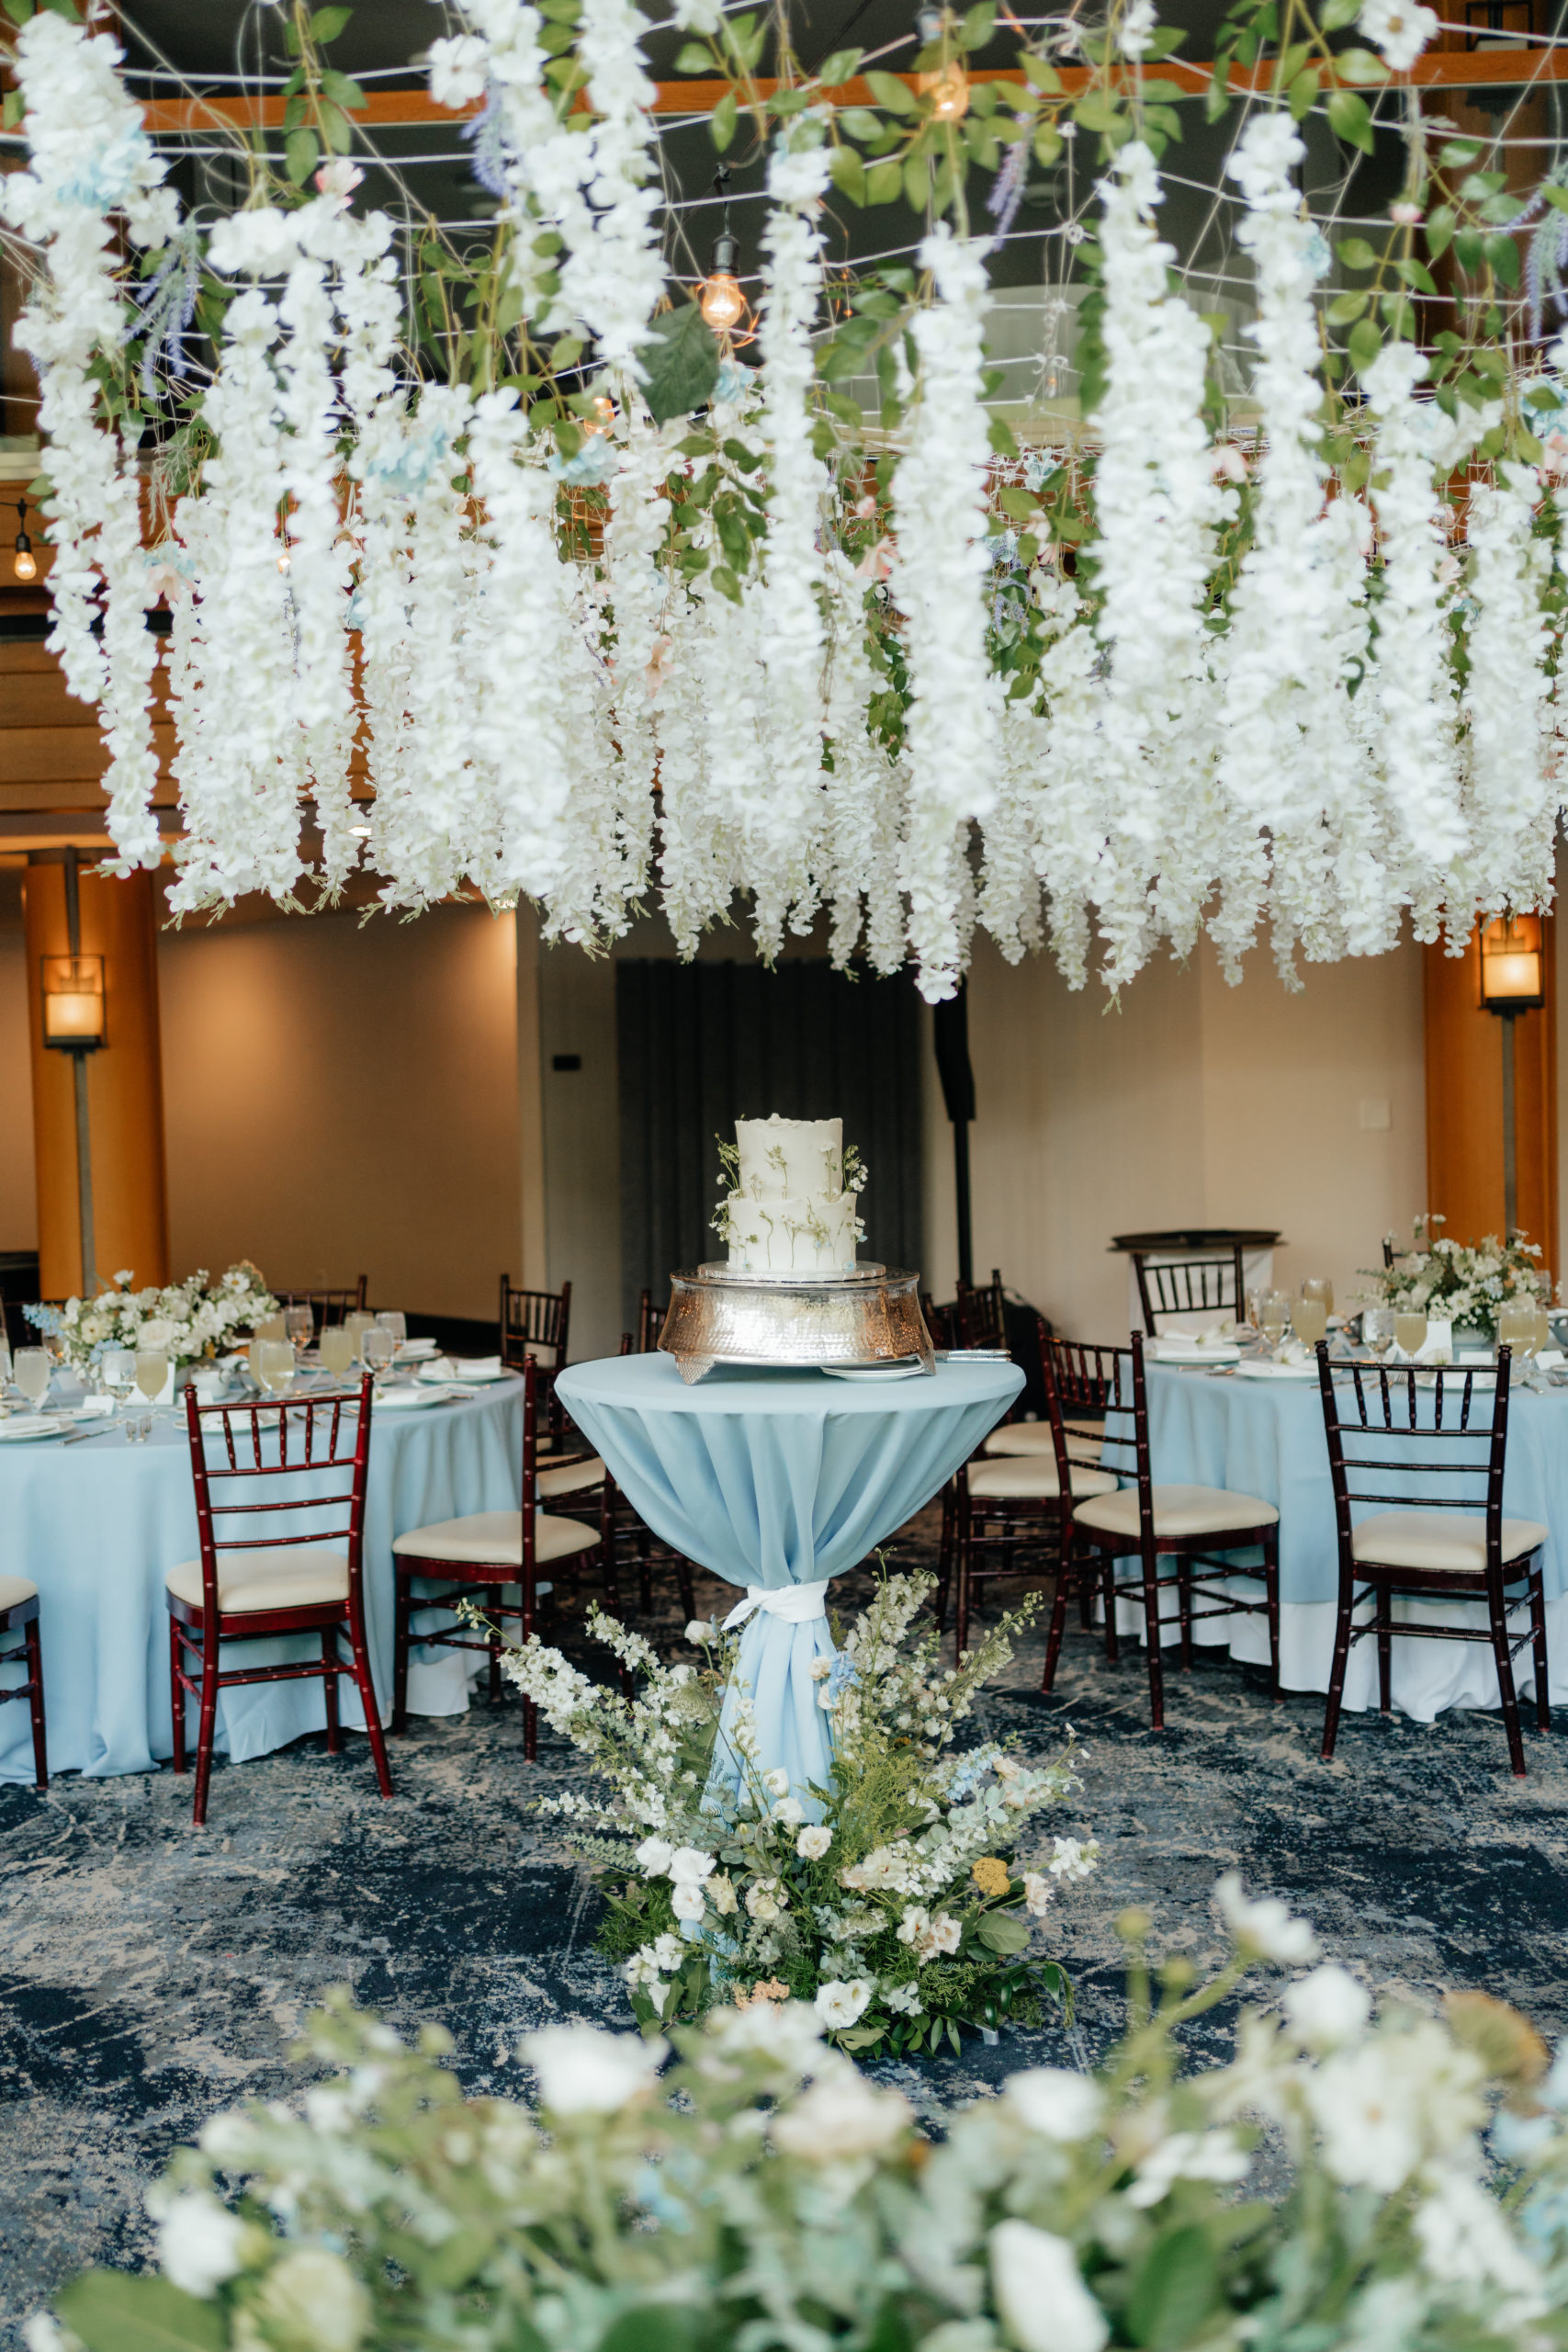 Wildflower wedding florals hanging from a ceiling and detailing a cake in the center of the room.